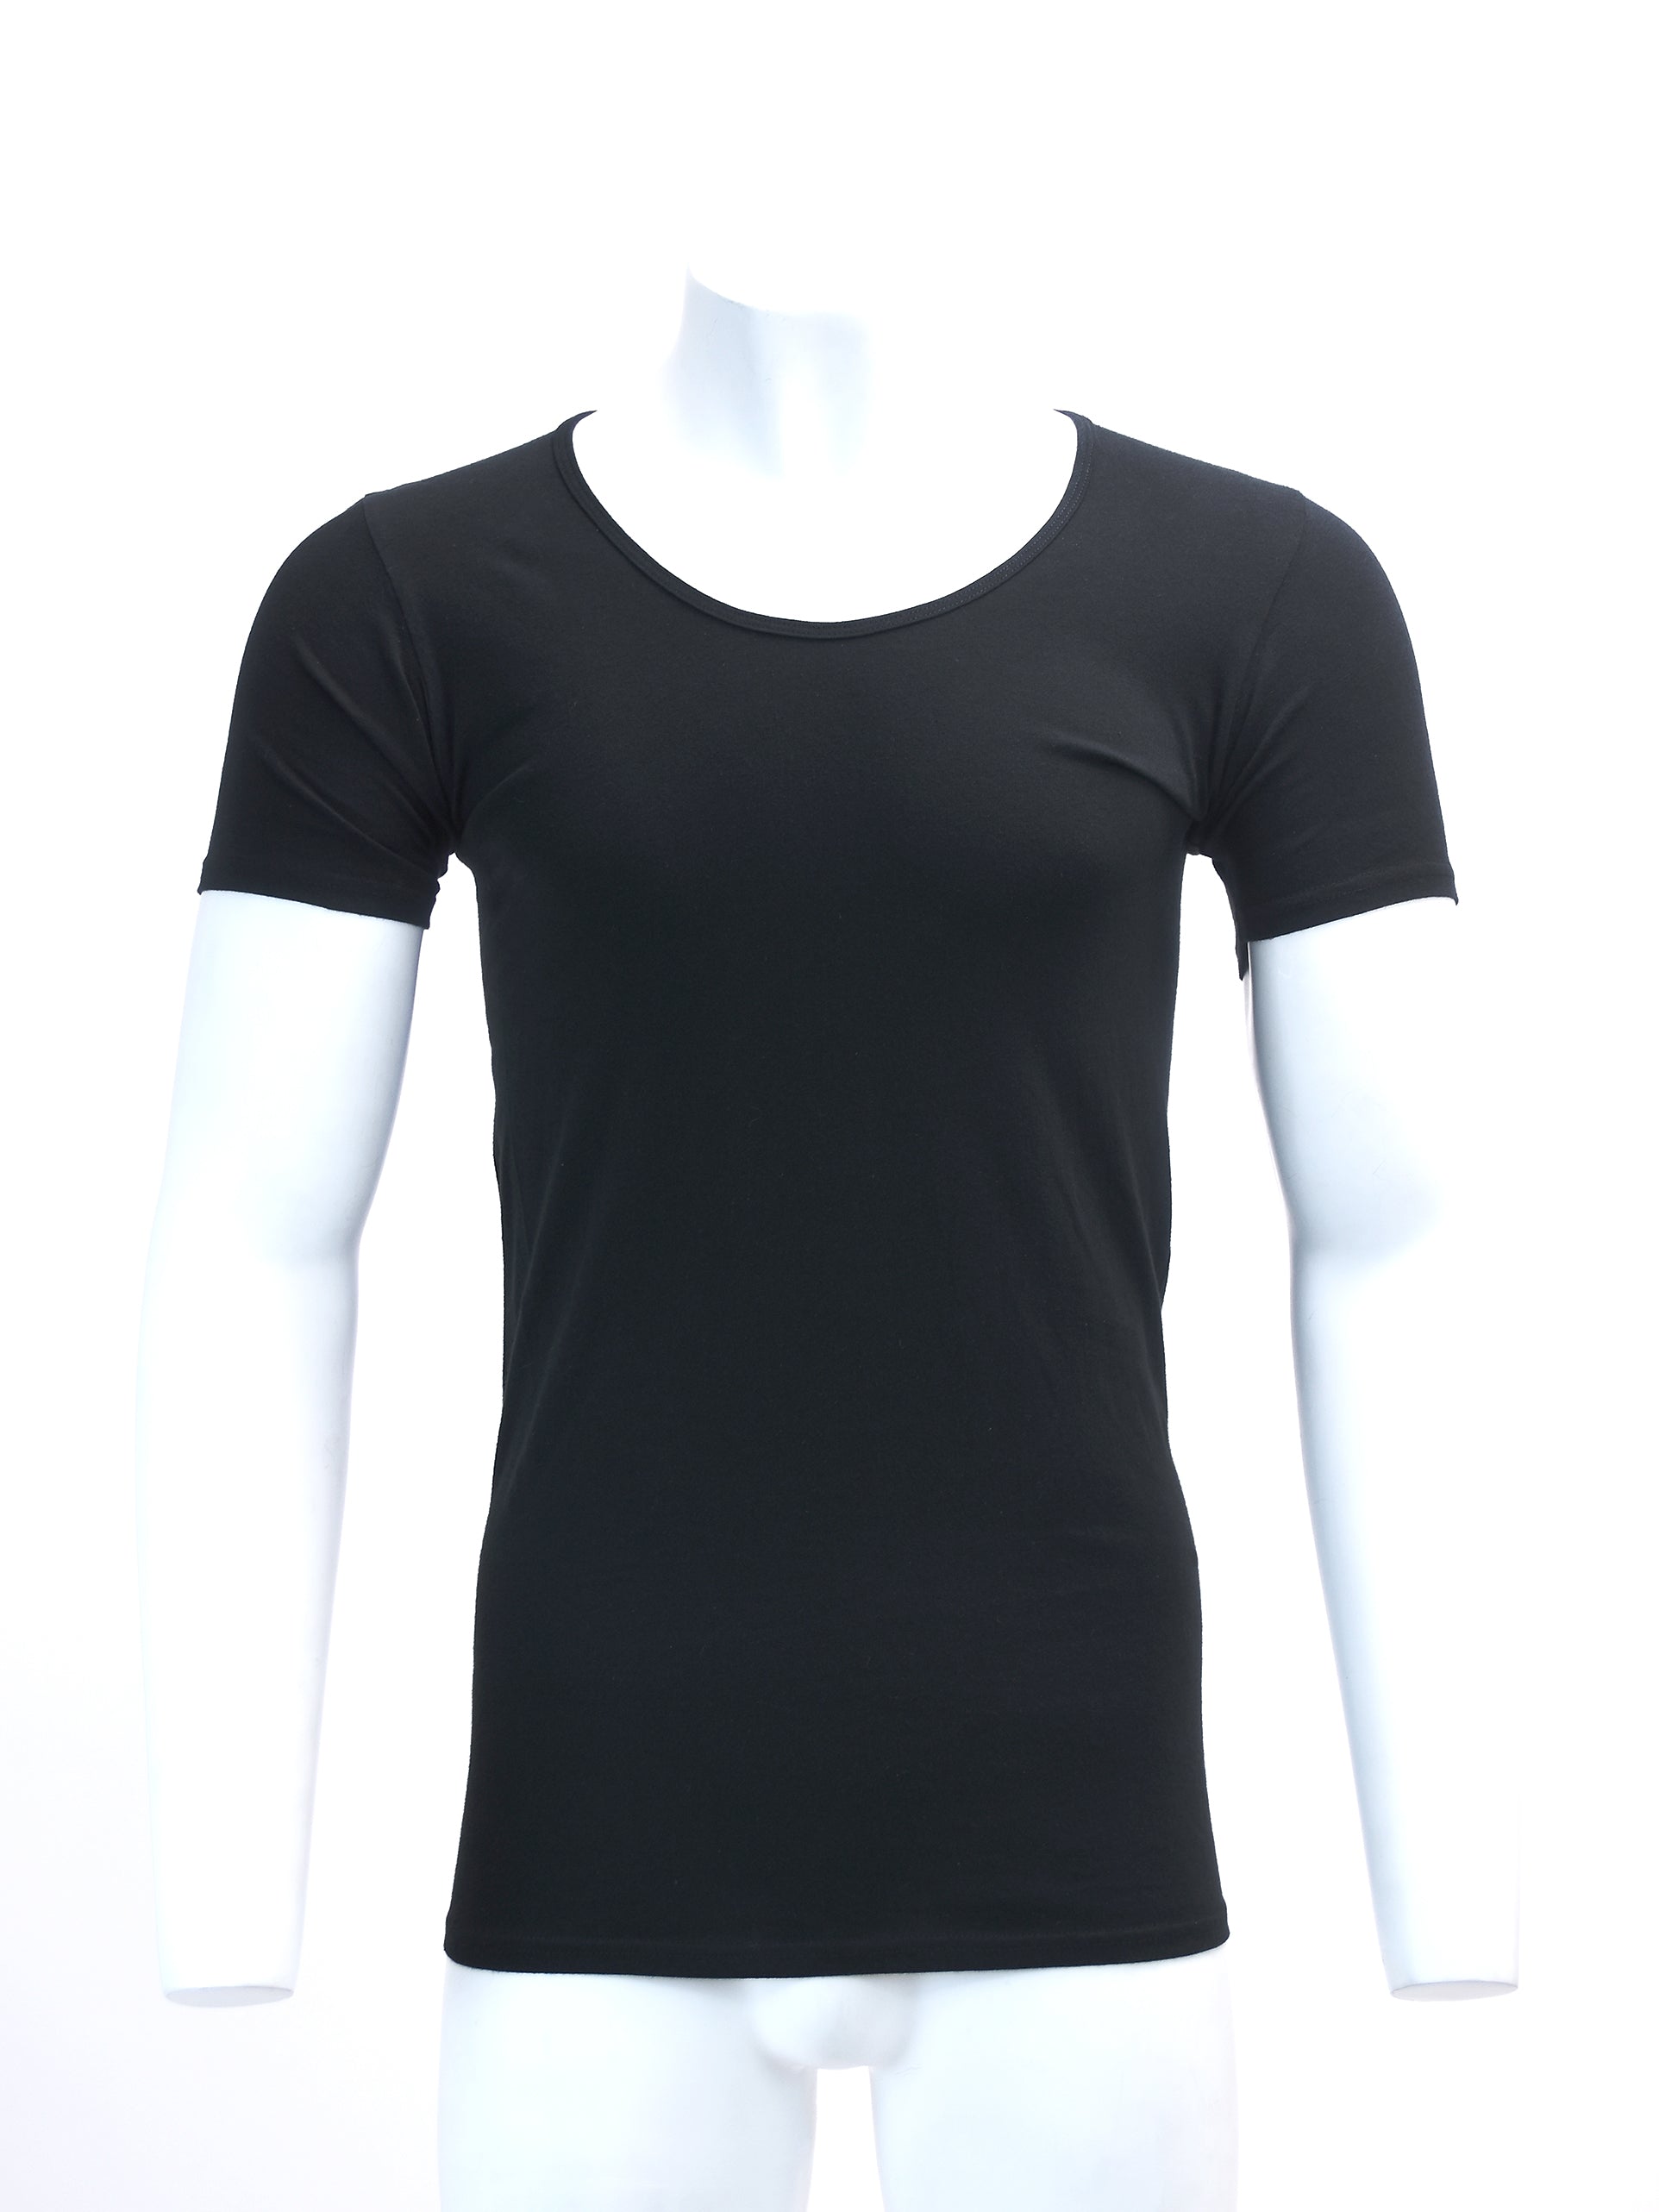 WIDE NECK T-SHIRT IN BLACK